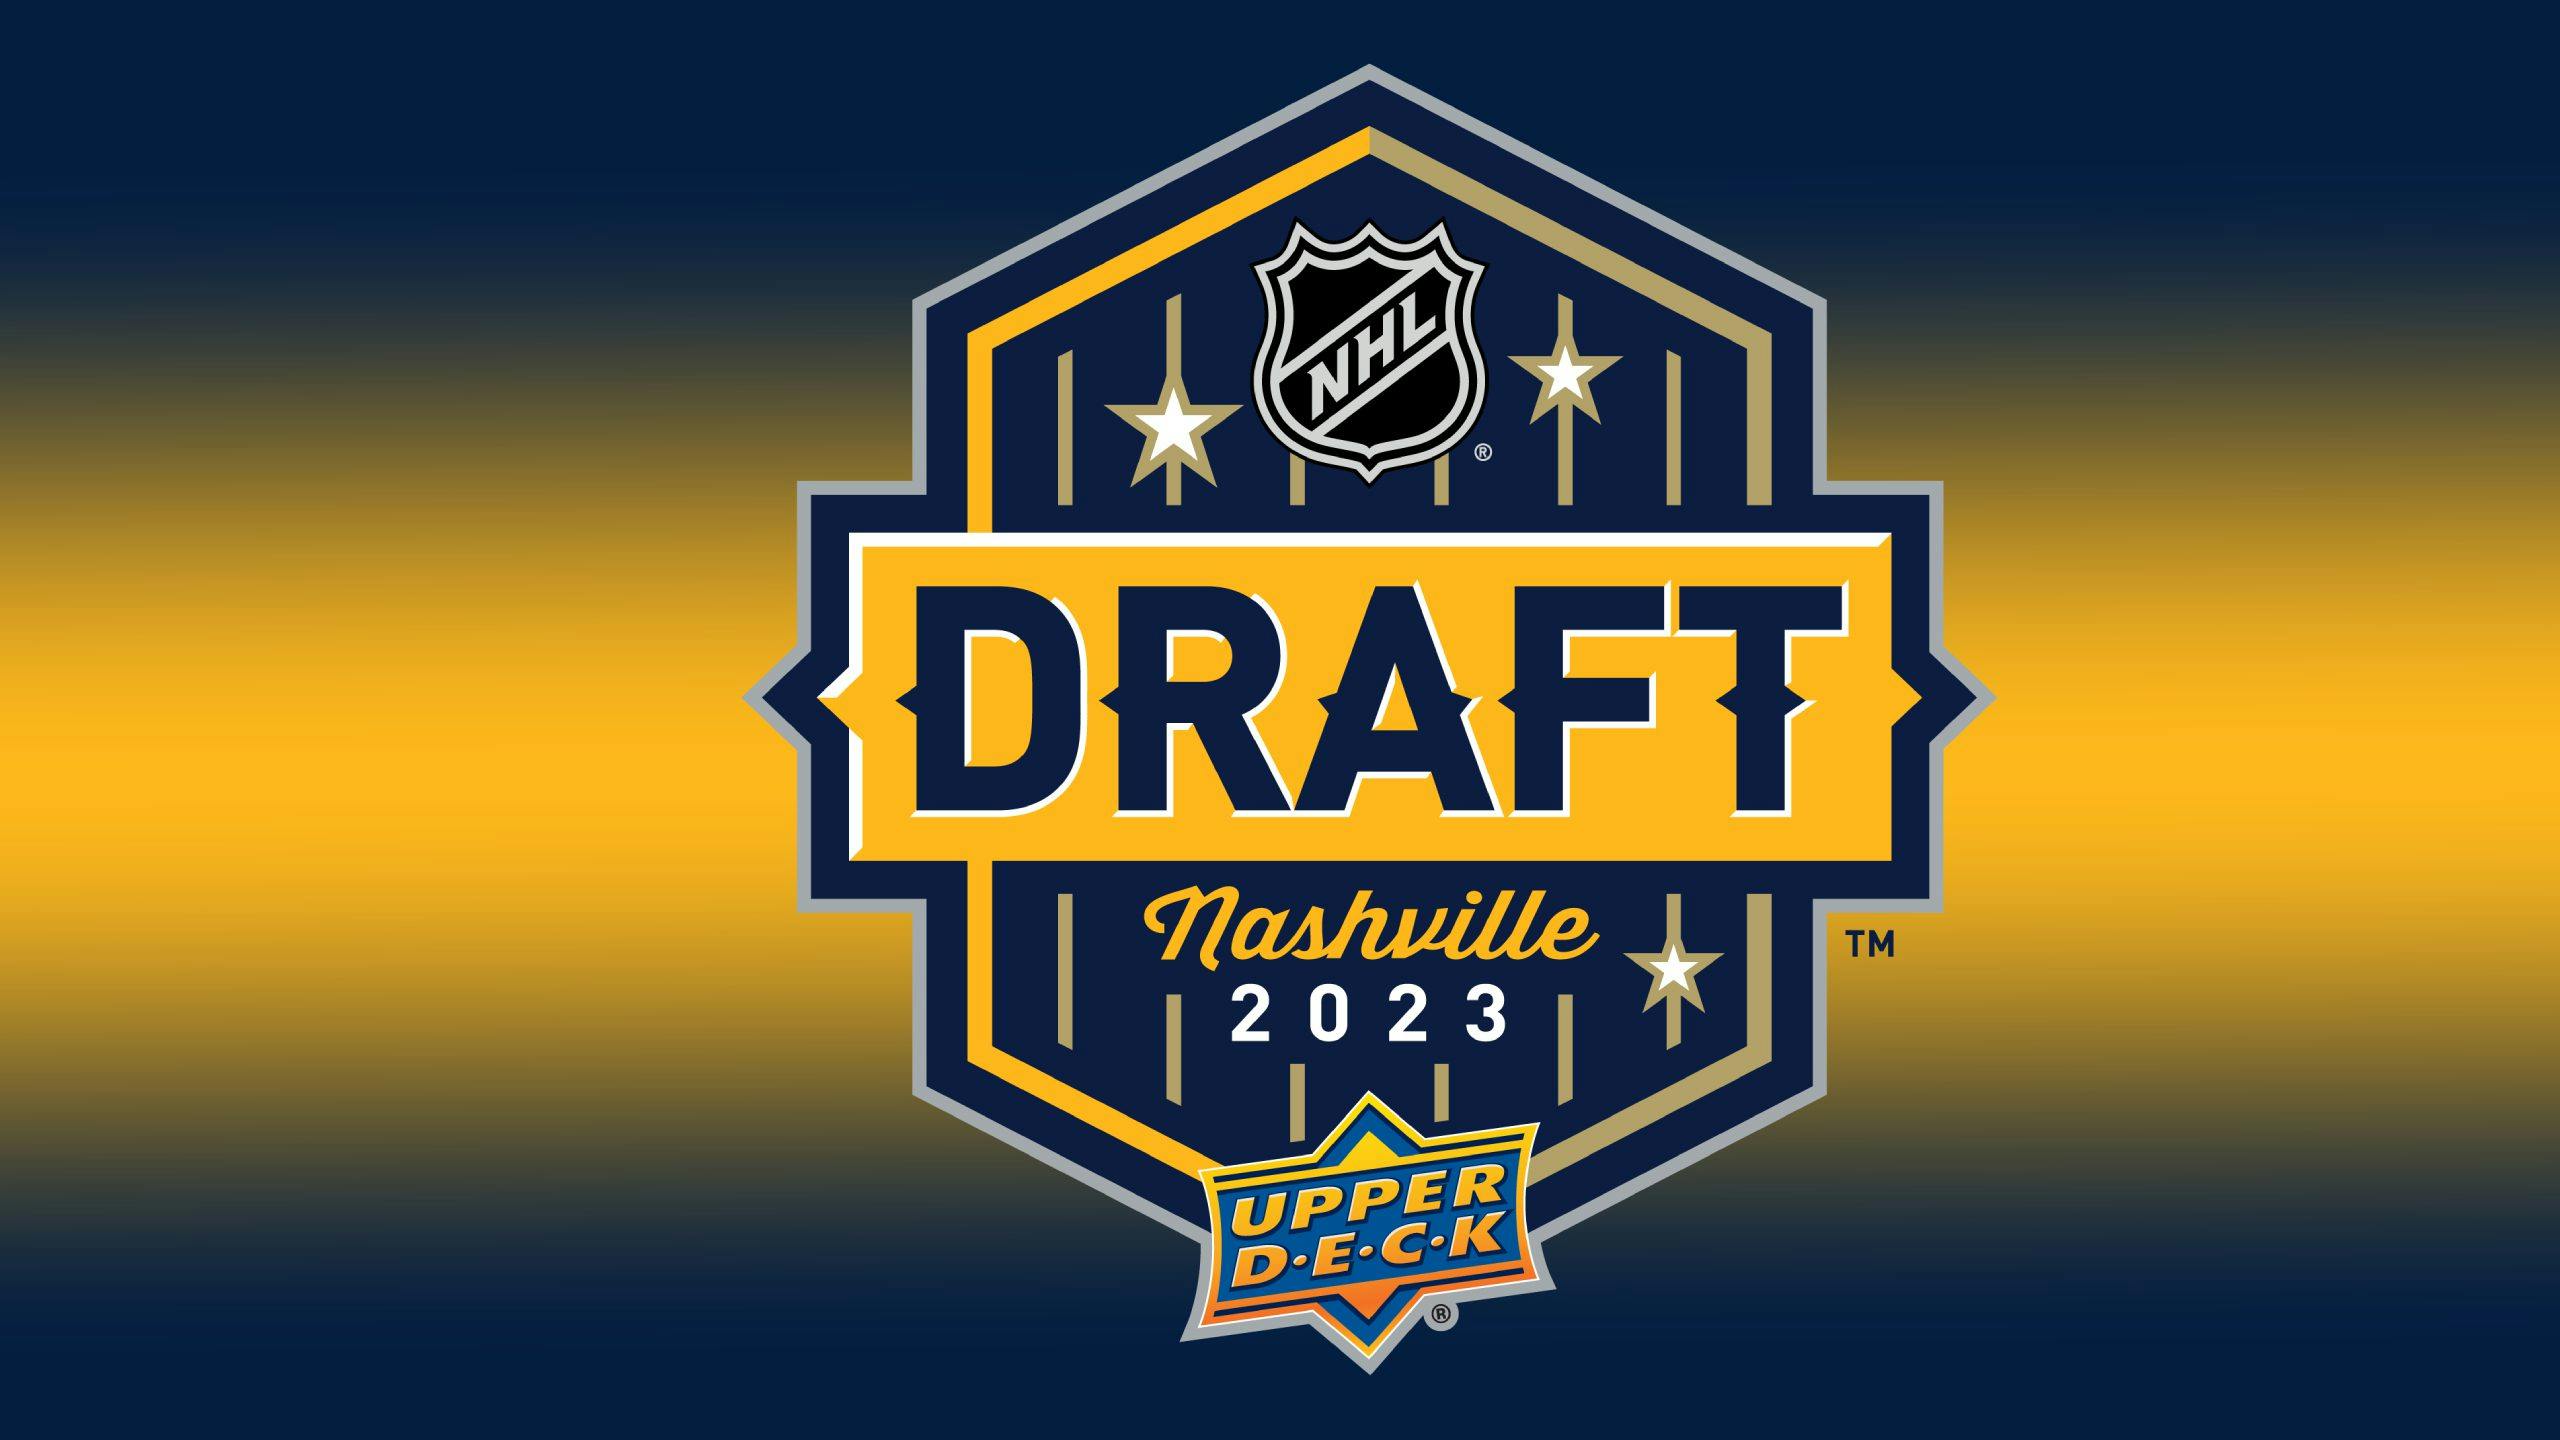 Which is the most interesting team at the 2023 NHL Draft?